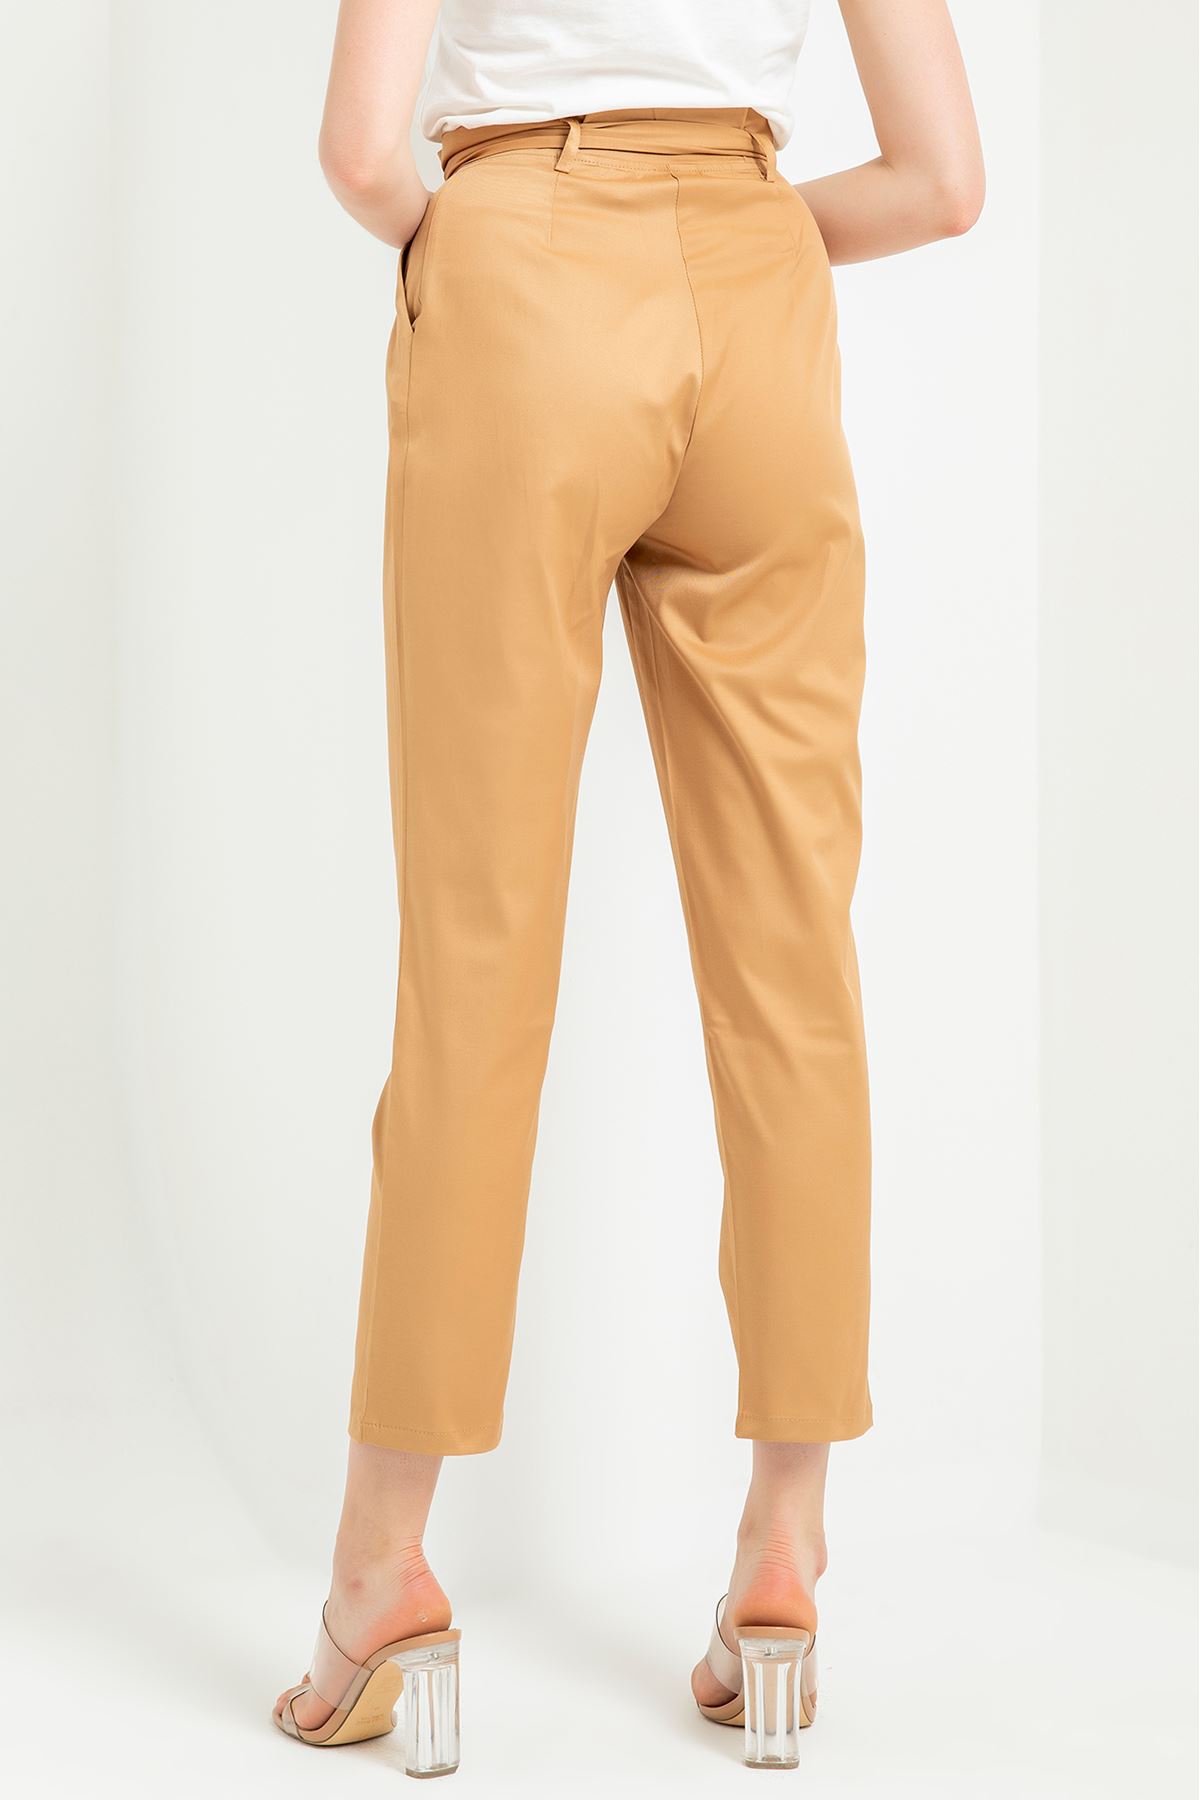 Woven Fabric Ankle Length Carrot Style Belted Women'S Trouser - Light Brown